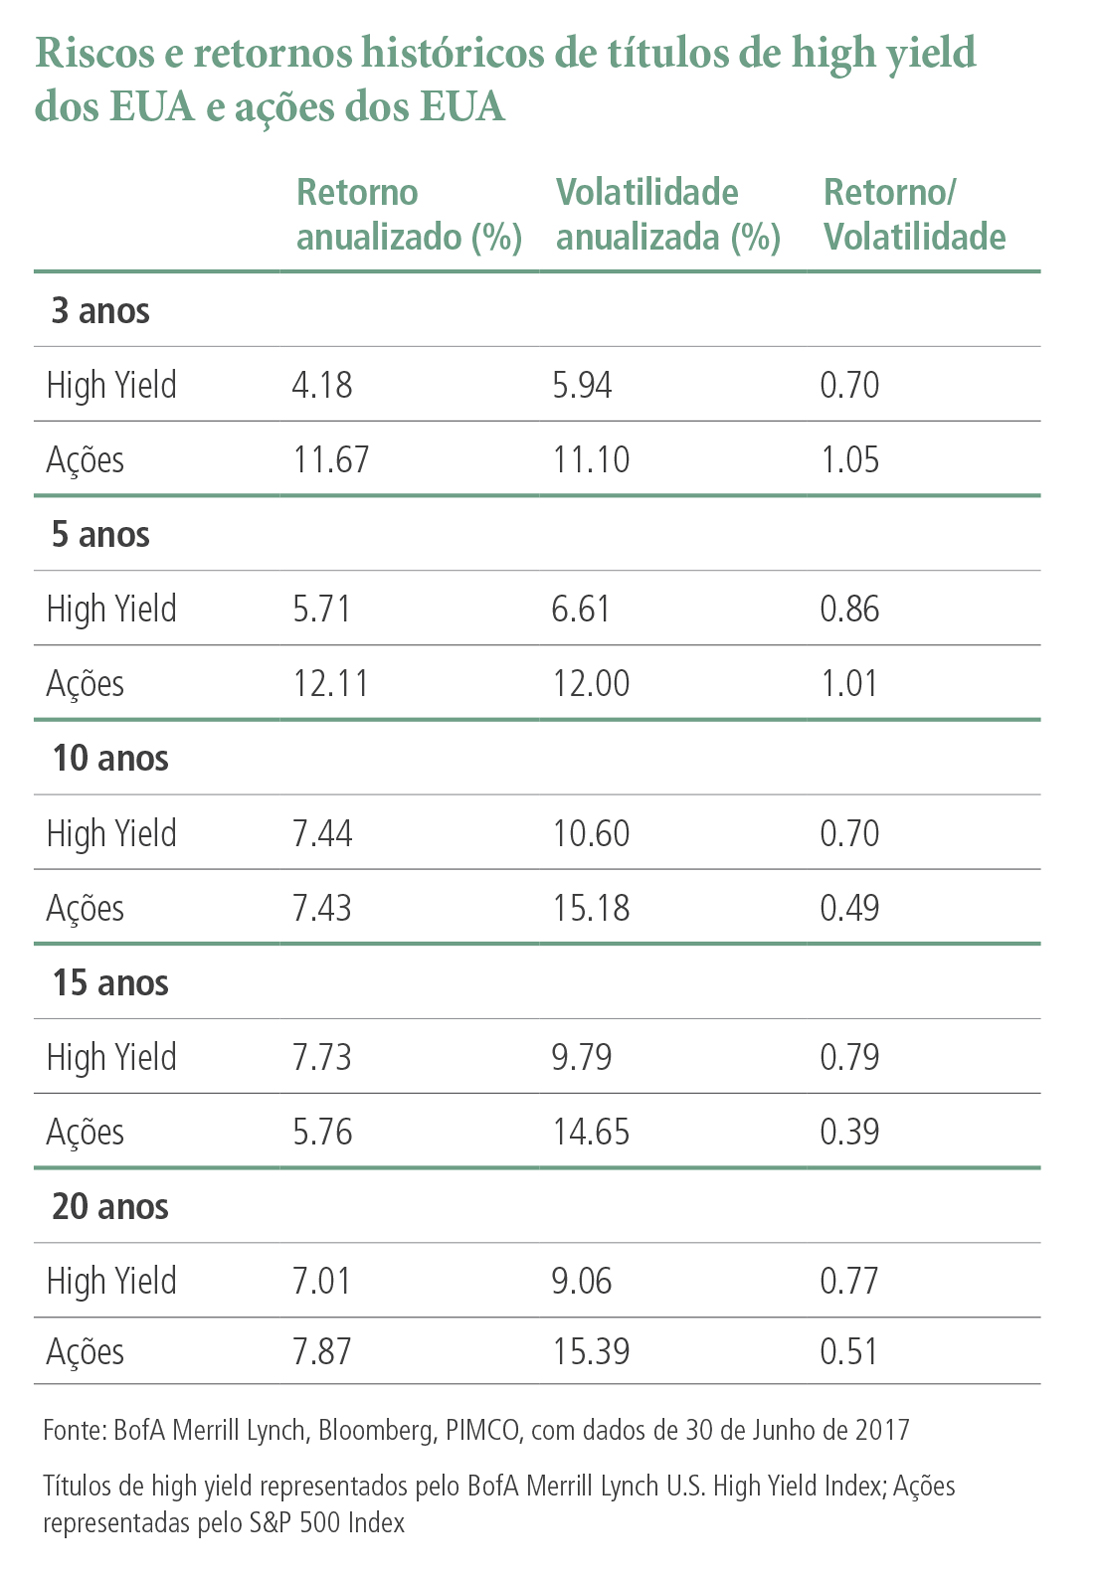 The table compares historical risks and annualized returns for the BoFA Merrill Lynch U.S. High Yield Index versus the S&P 500 Index  for 3-year, 5-year, 10-year, 15-year and 20-year periods